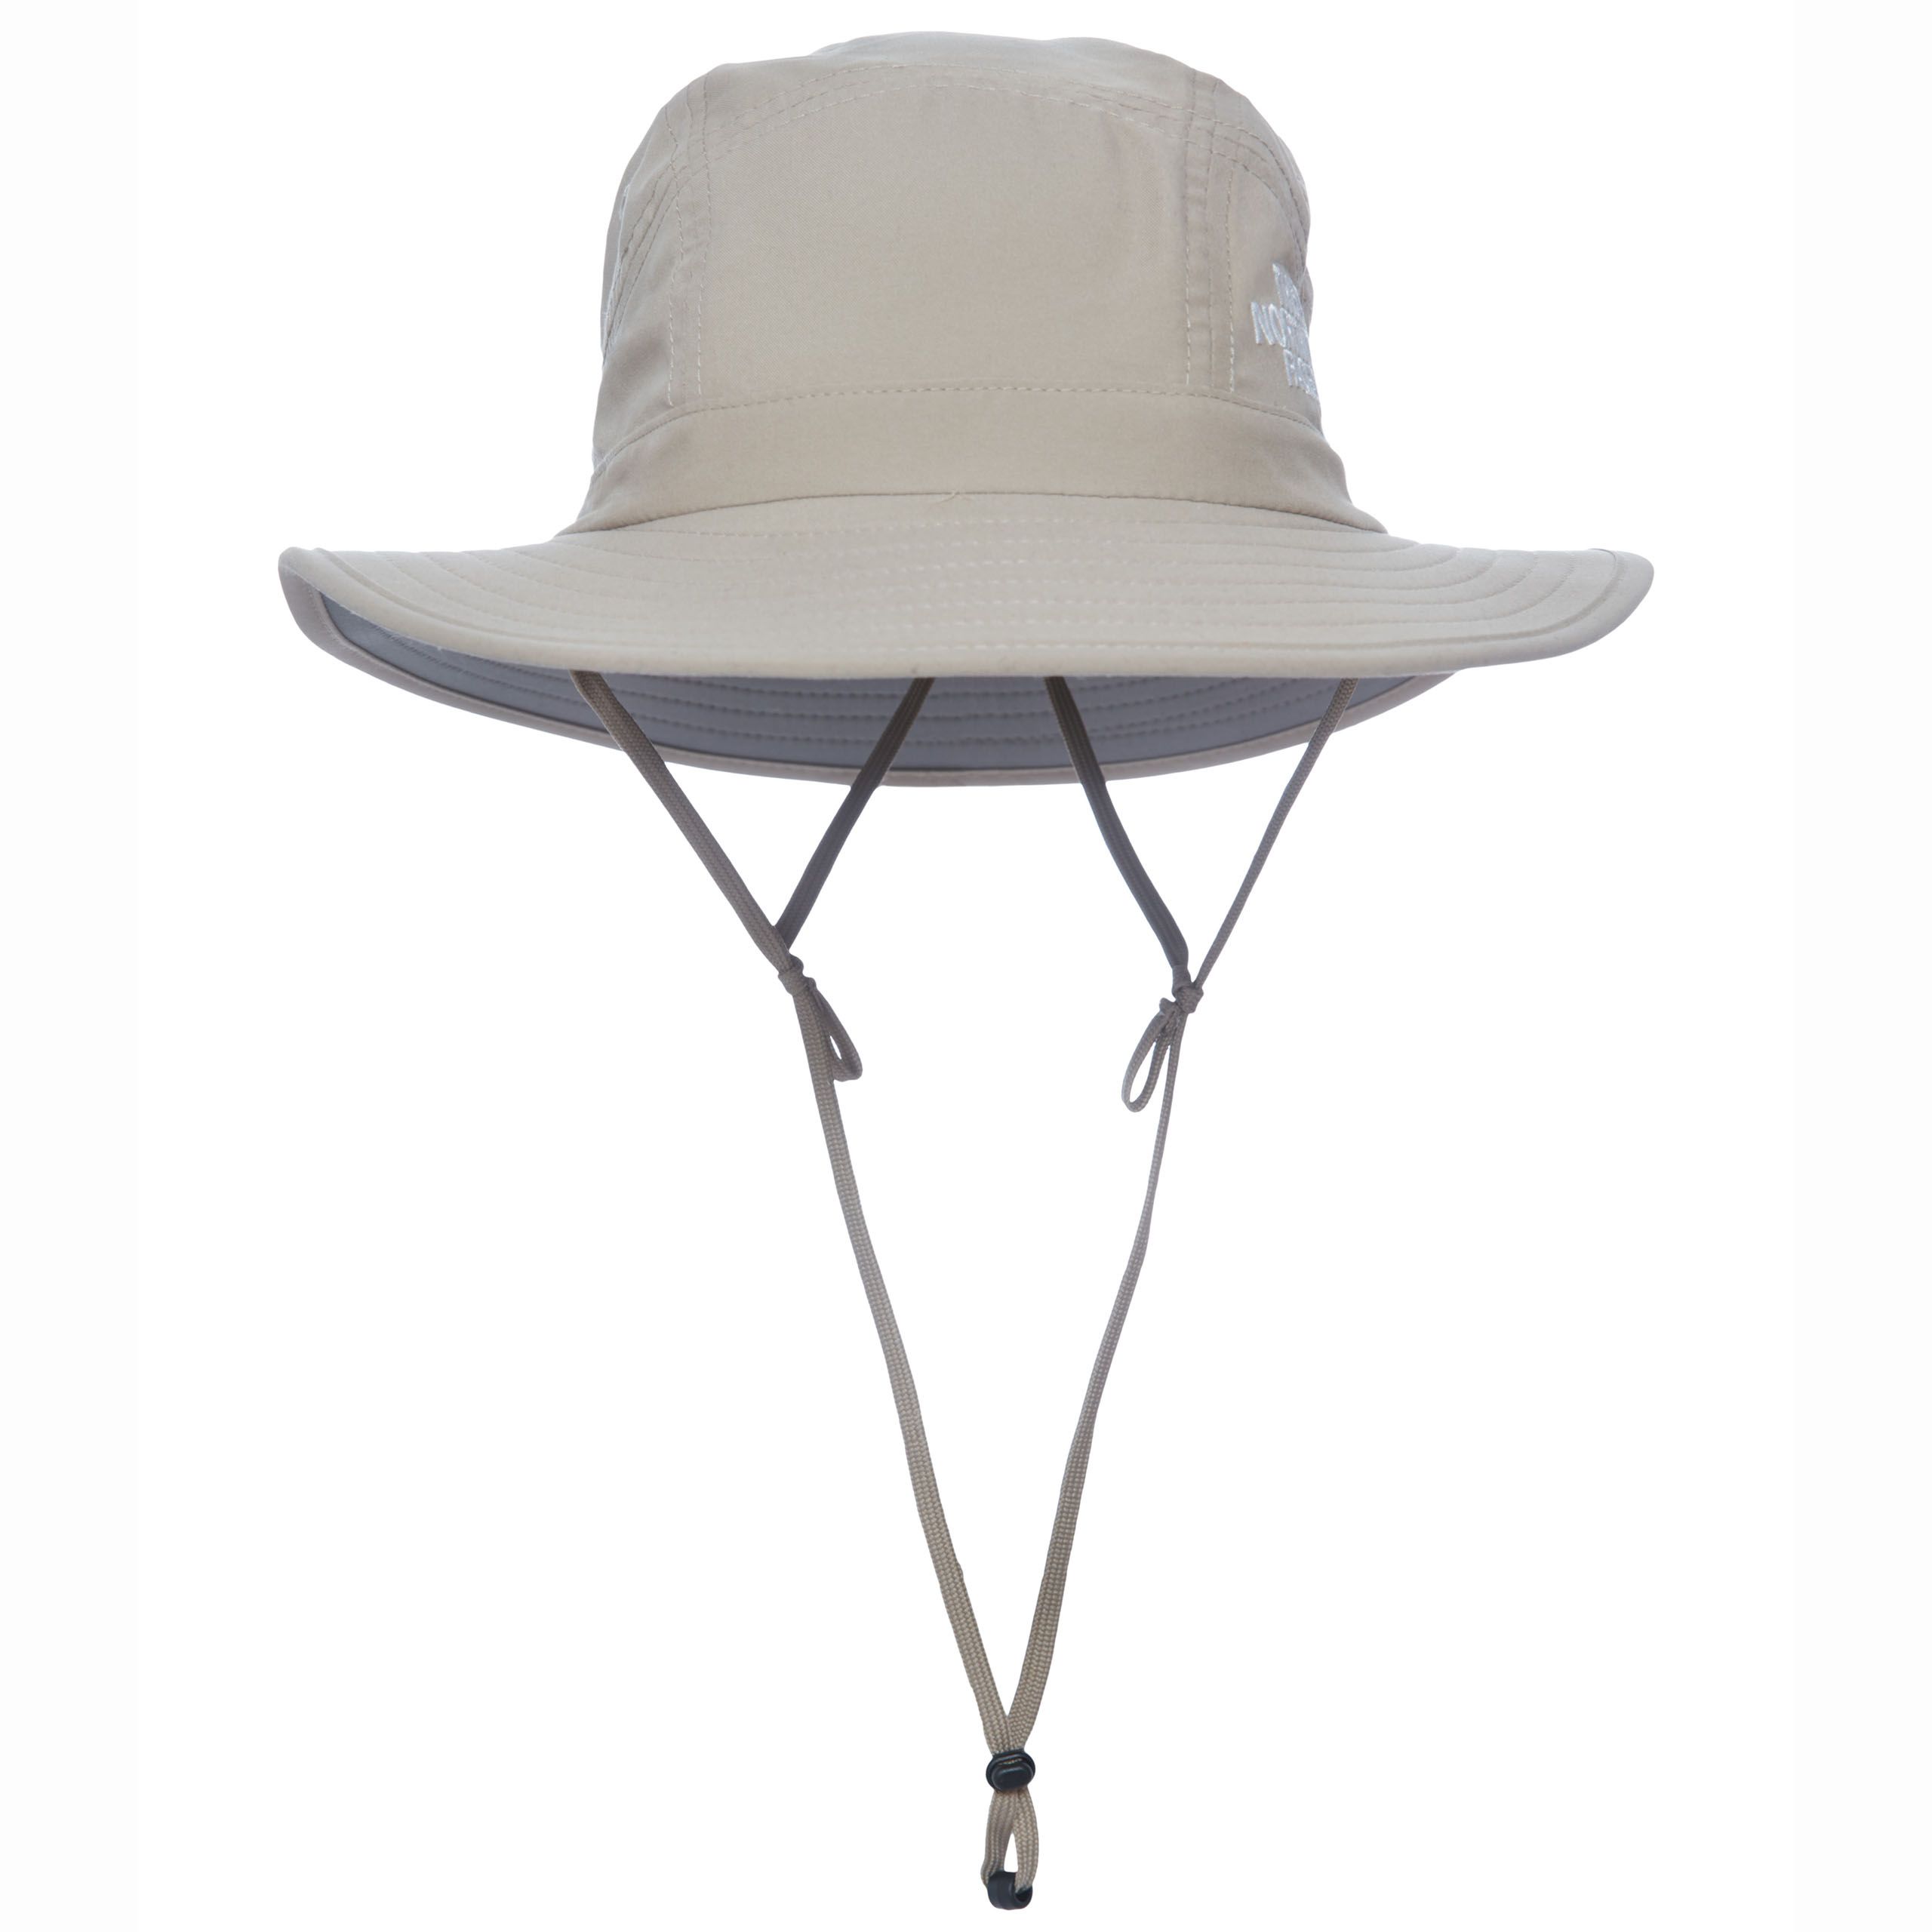 The North Face Suppertime Hat